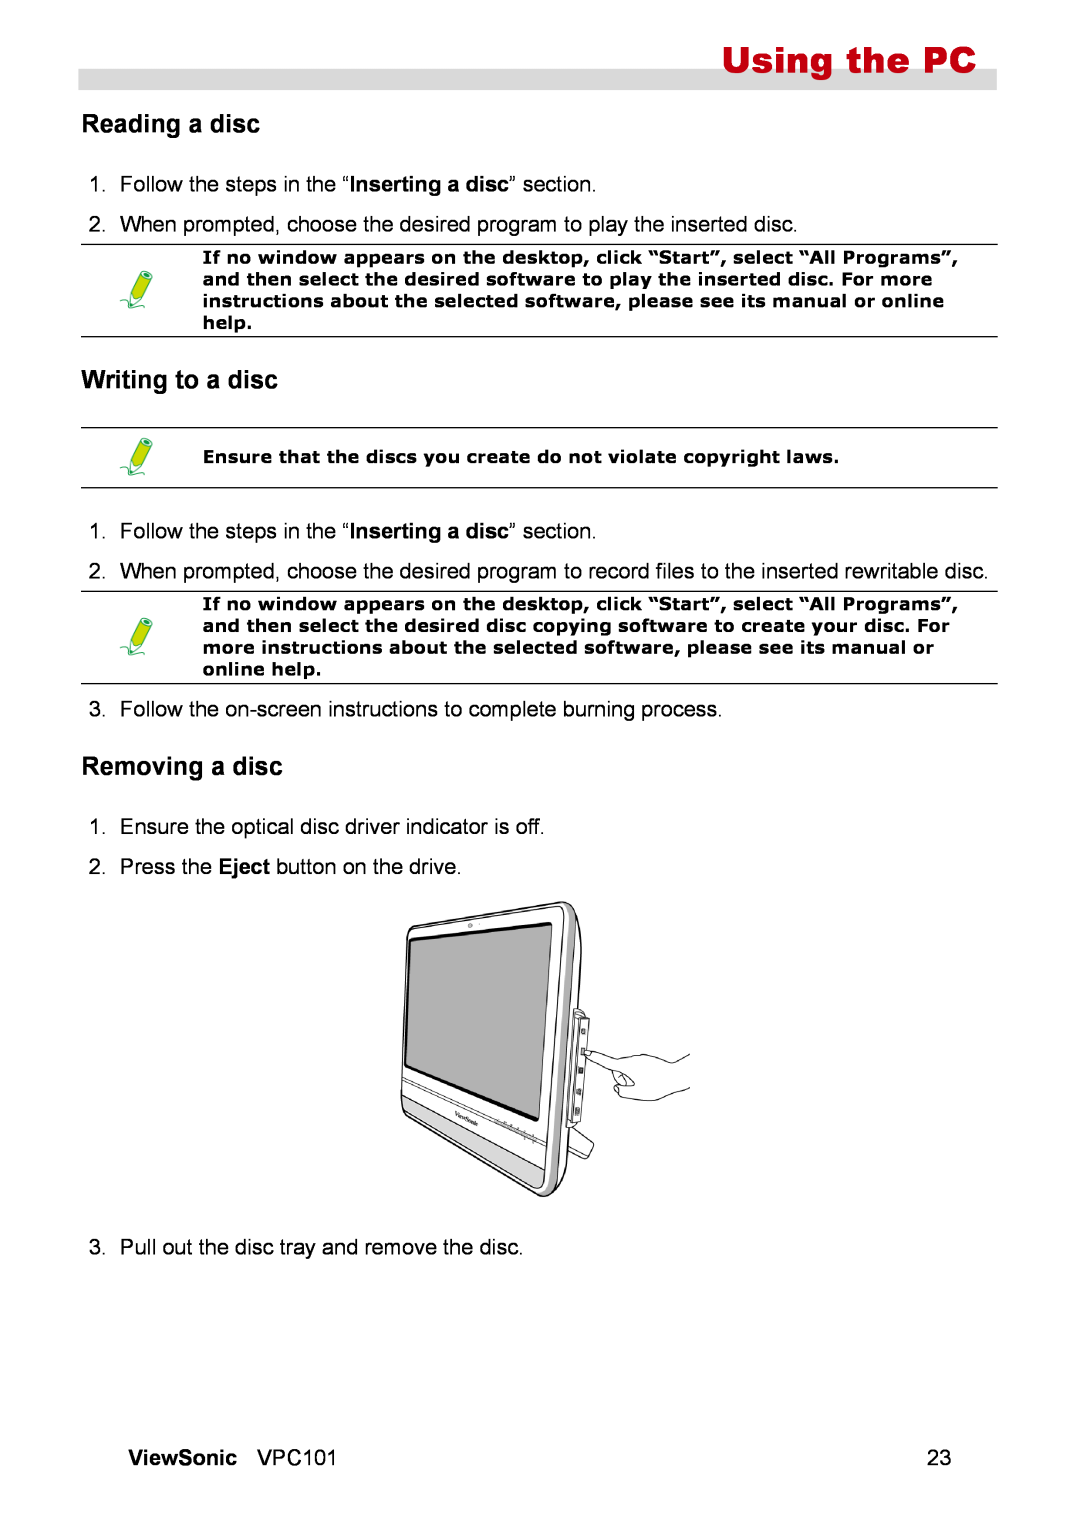 ViewSonic VPC101 manual Reading a disc, Writing to a disc, Removing a disc, Using the PC 